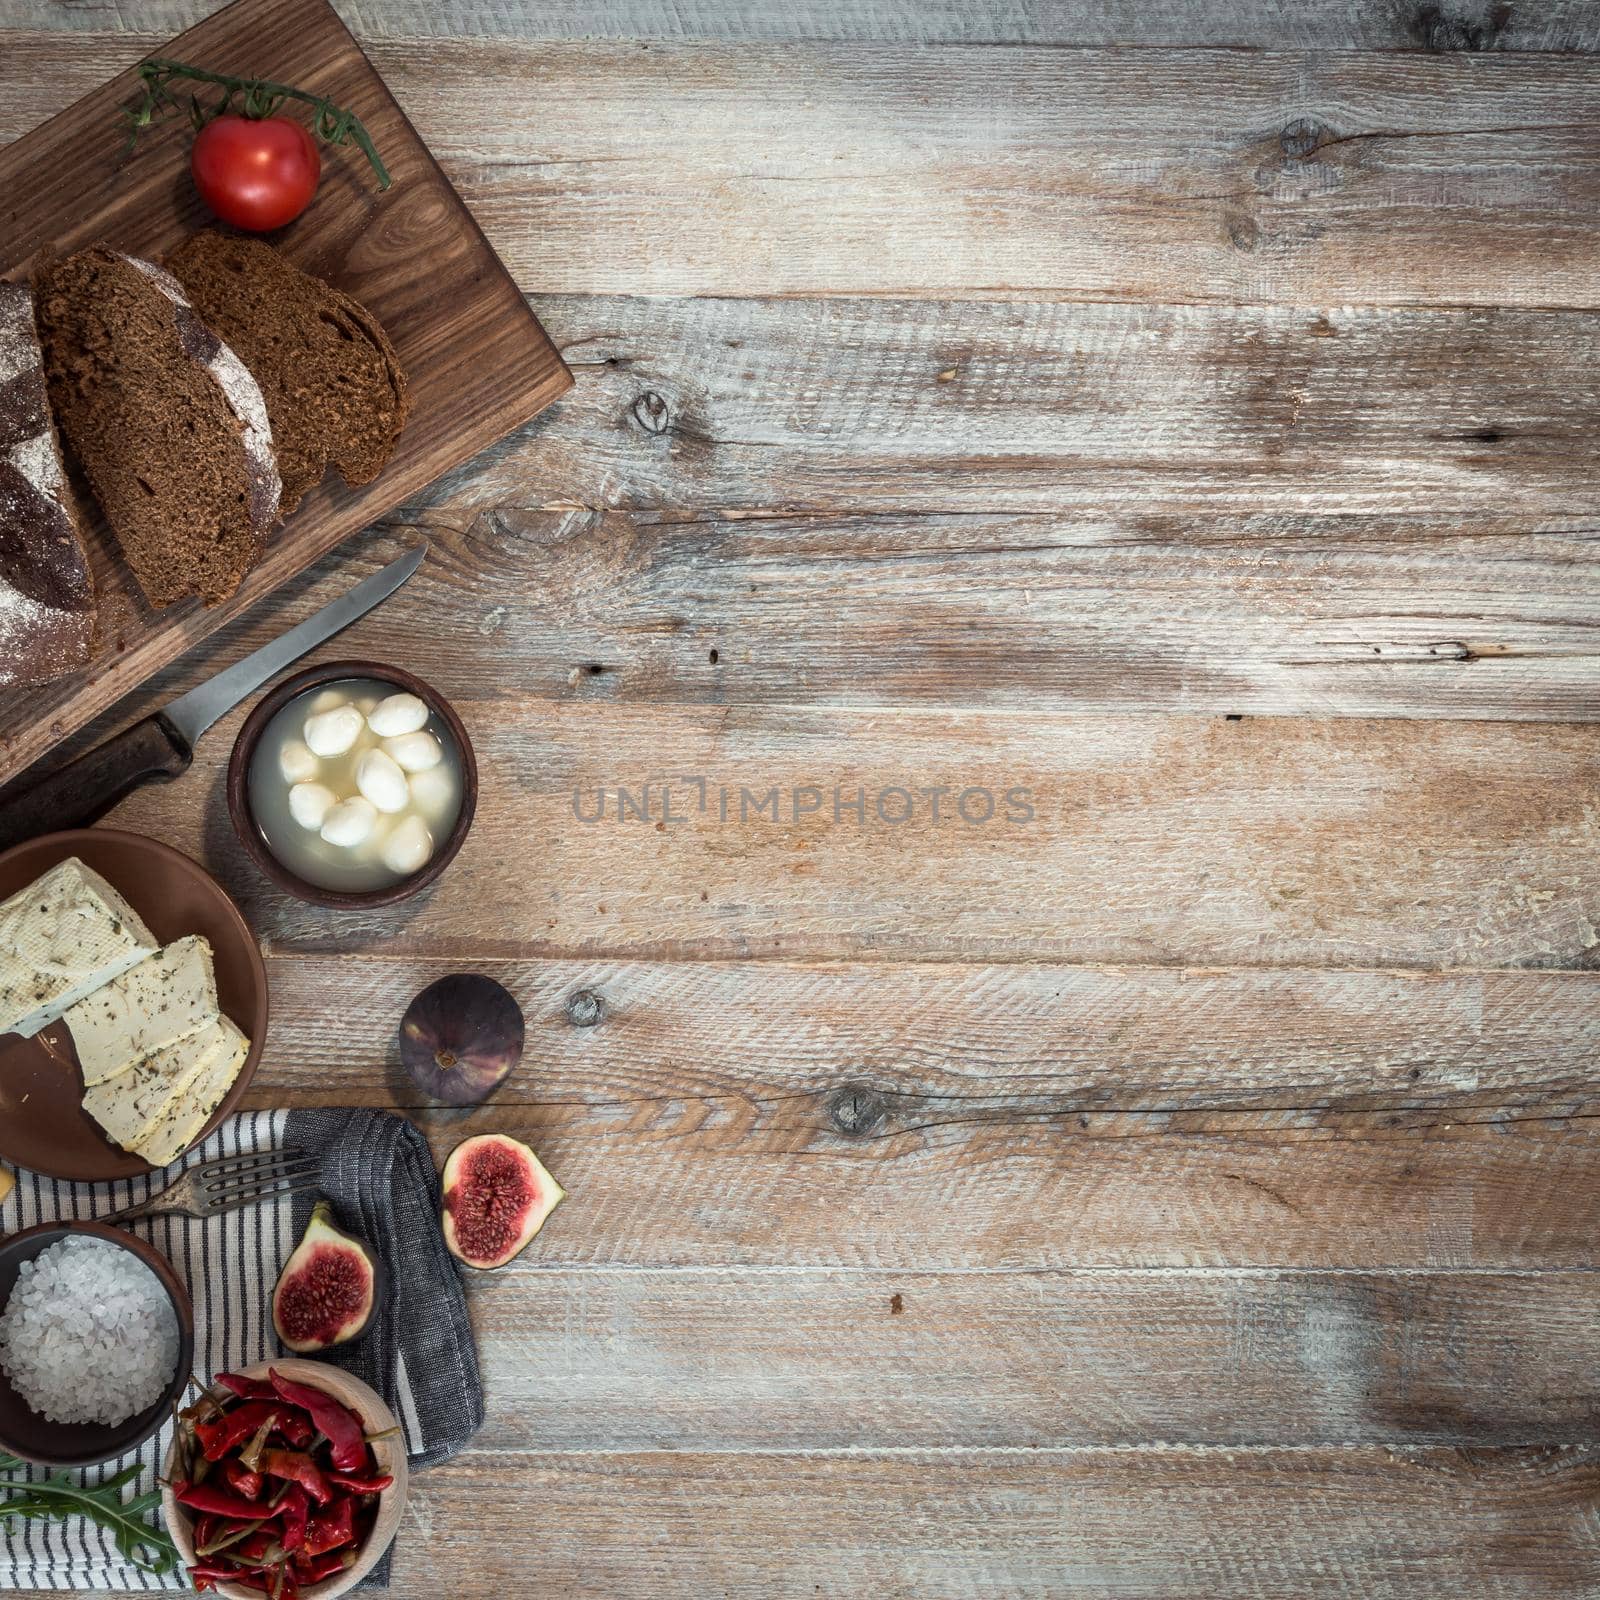 cheeses and brown bread on wooden table by tan4ikk1